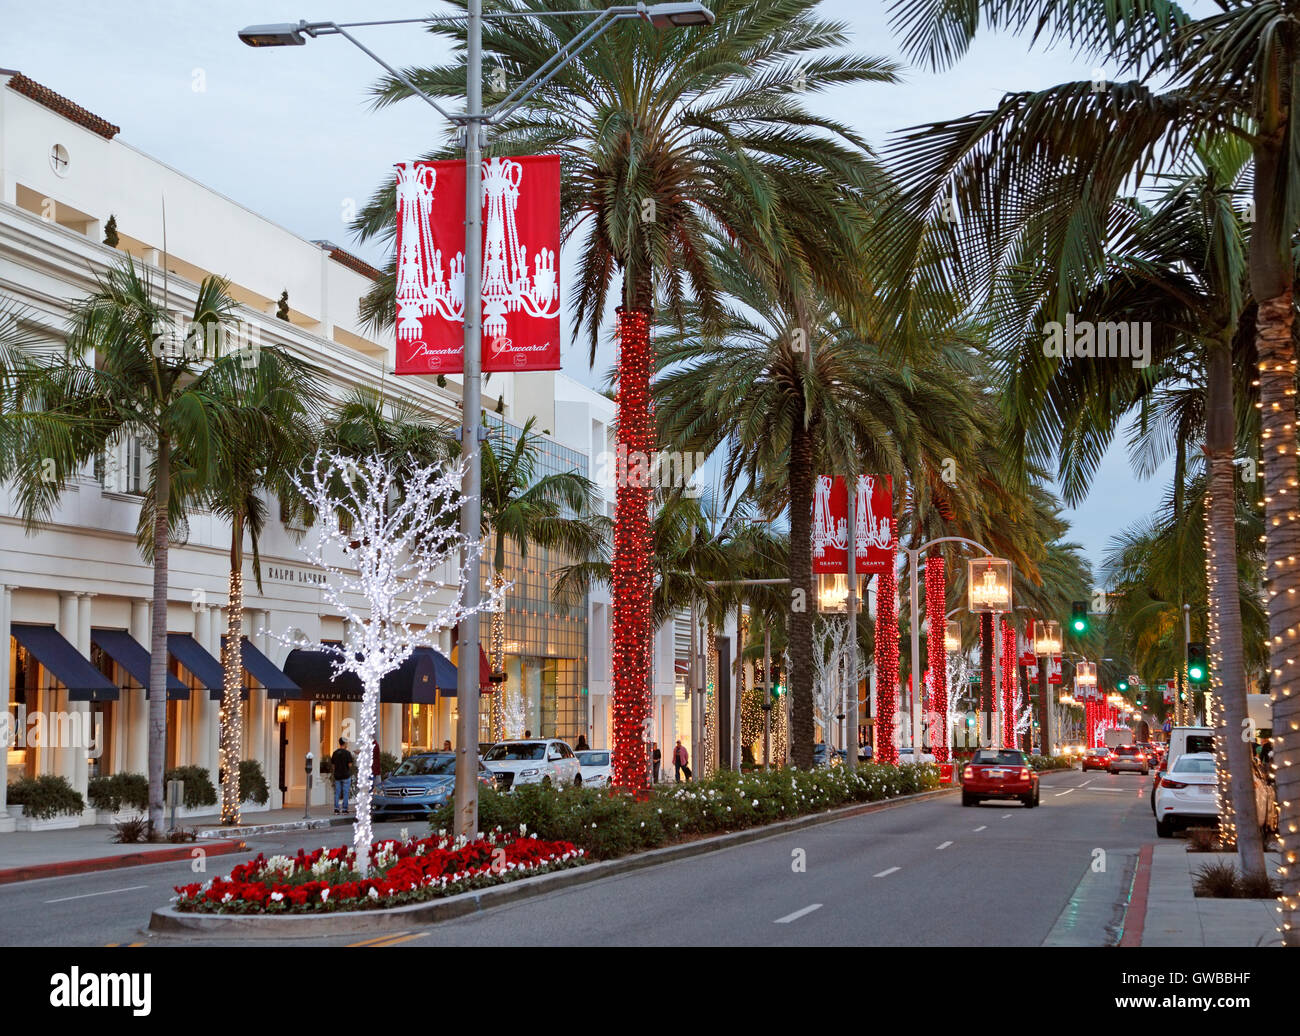 Rodeo Drive, Beverly Hills, Los Angeles, California. Christmas decorated street. Stock Photo